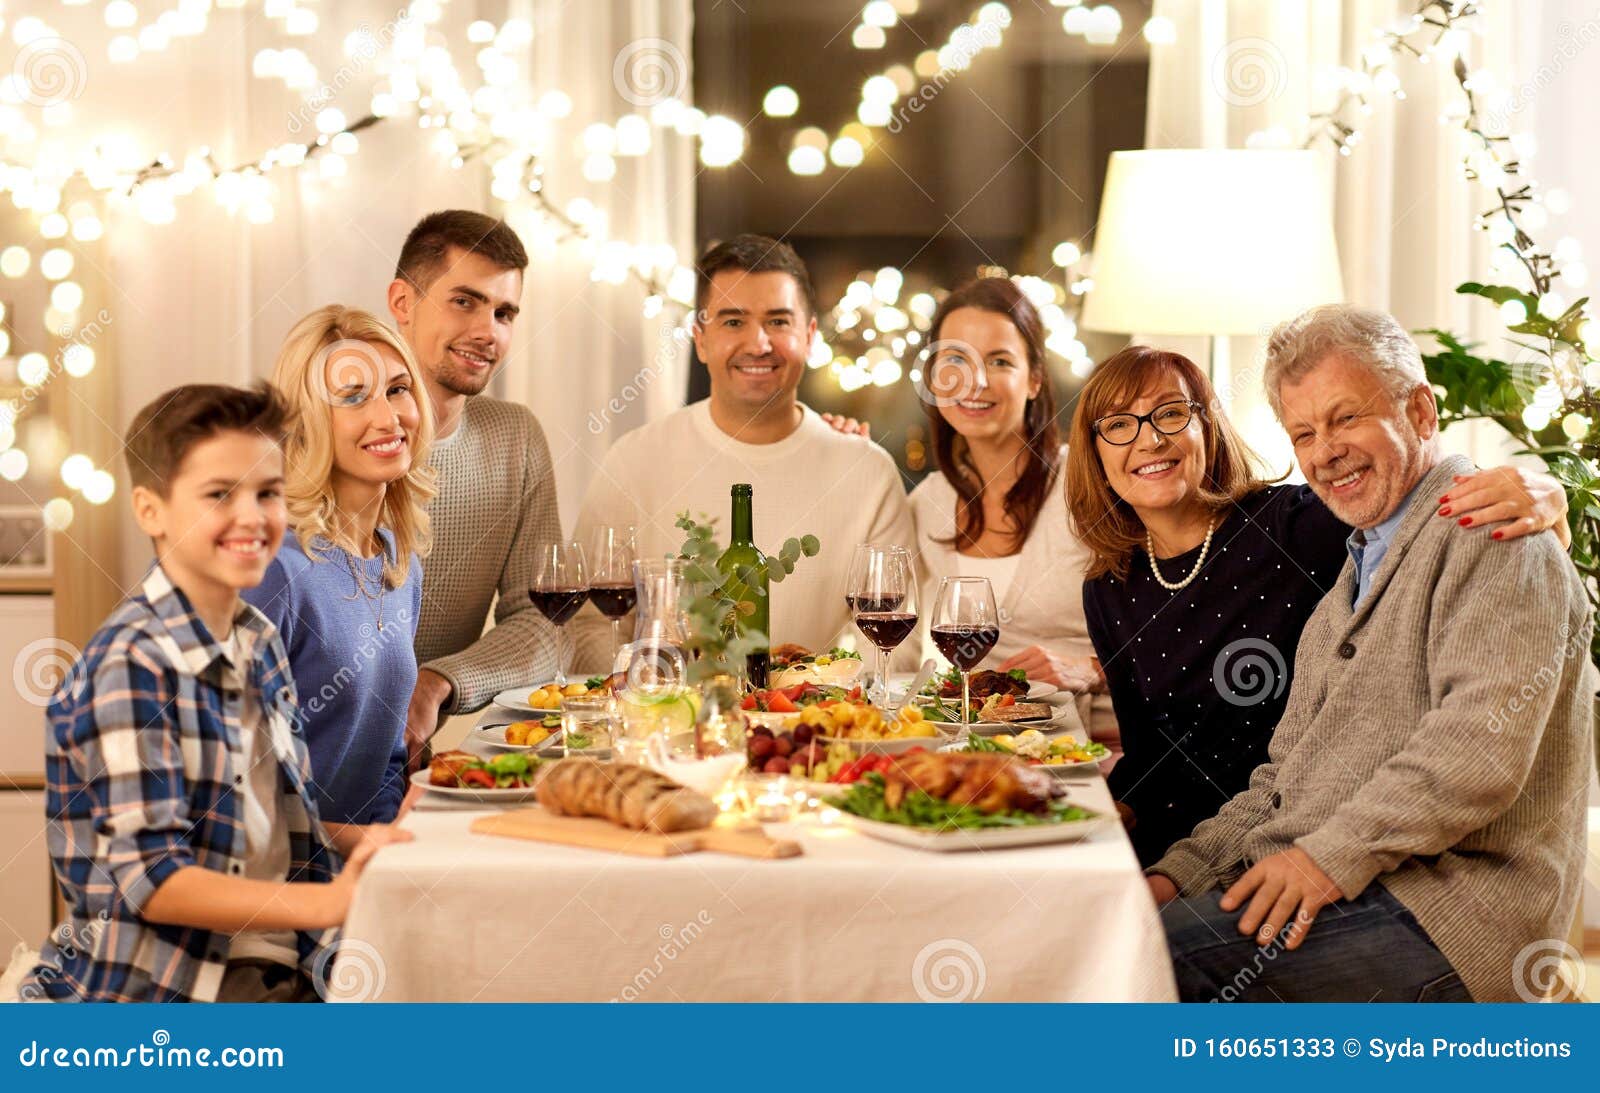 Happy Family Having Dinner Party At Home Stock Image - Image of holiday